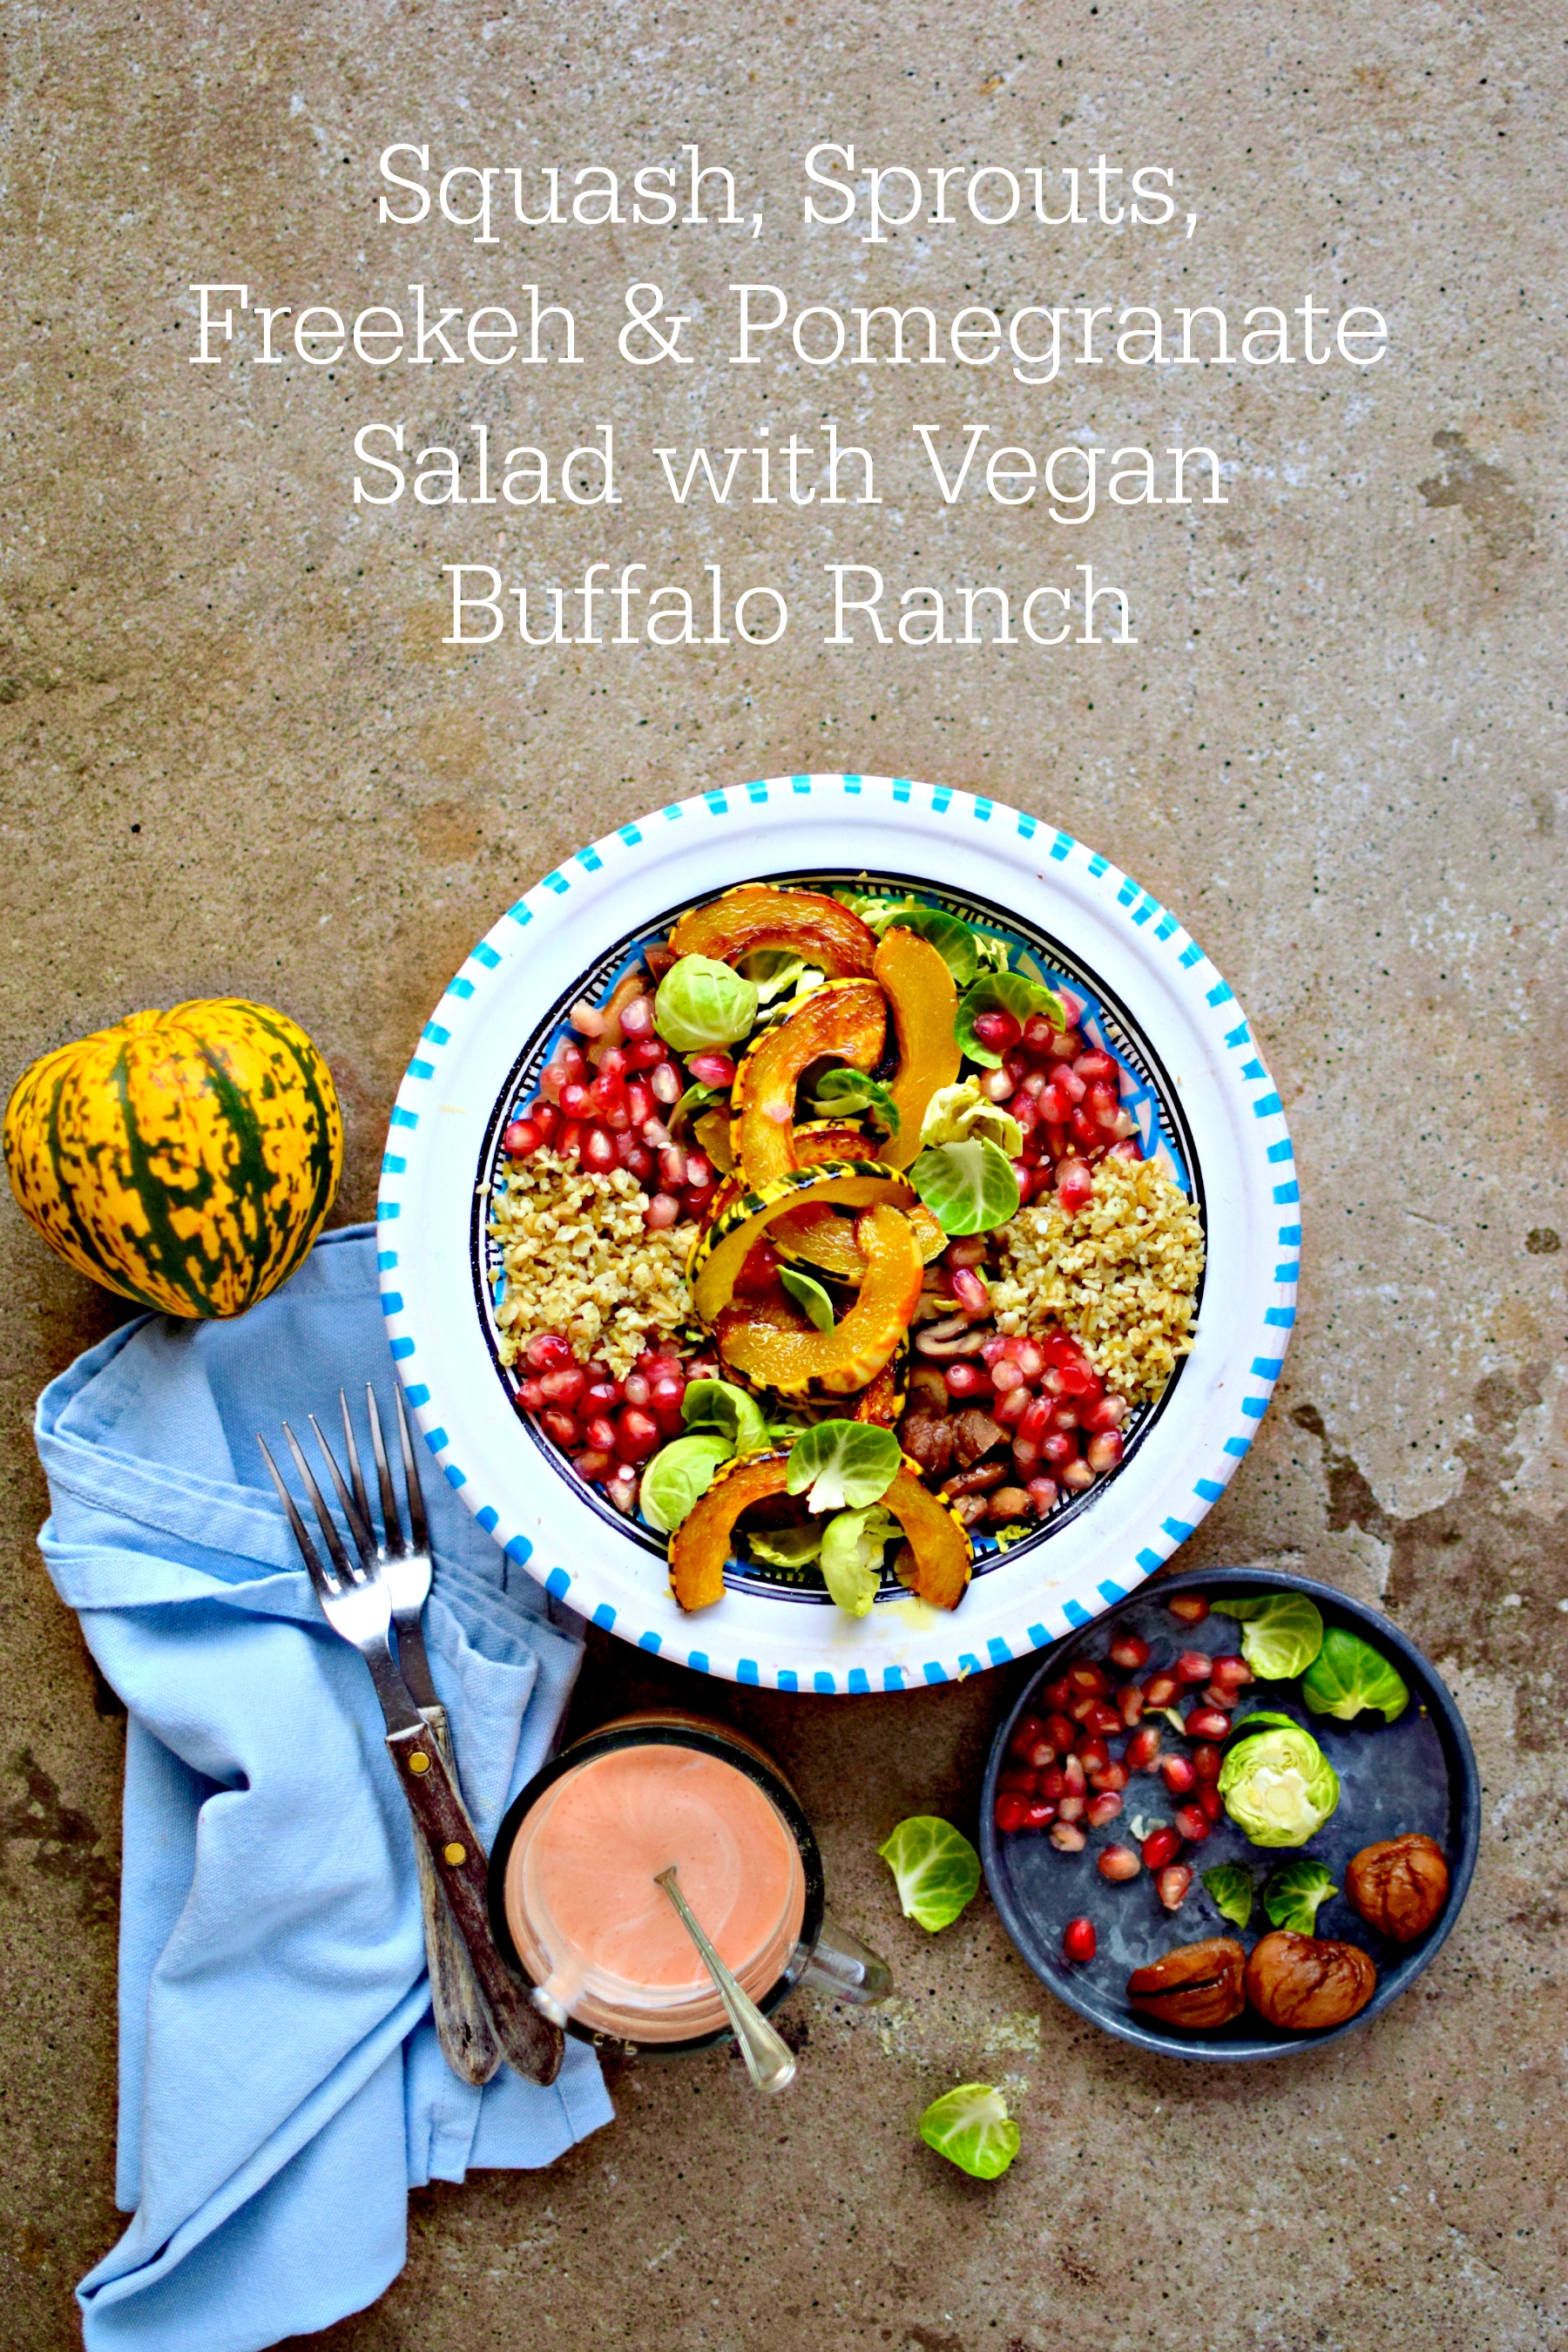 An A/W warm salad using winter squash, shredded sprouts, hearty grains, juicy pomegranate, earthy chestnuts, all topped off with a zingy vegan Buffalo ranch dressing to chase away the winter blues.